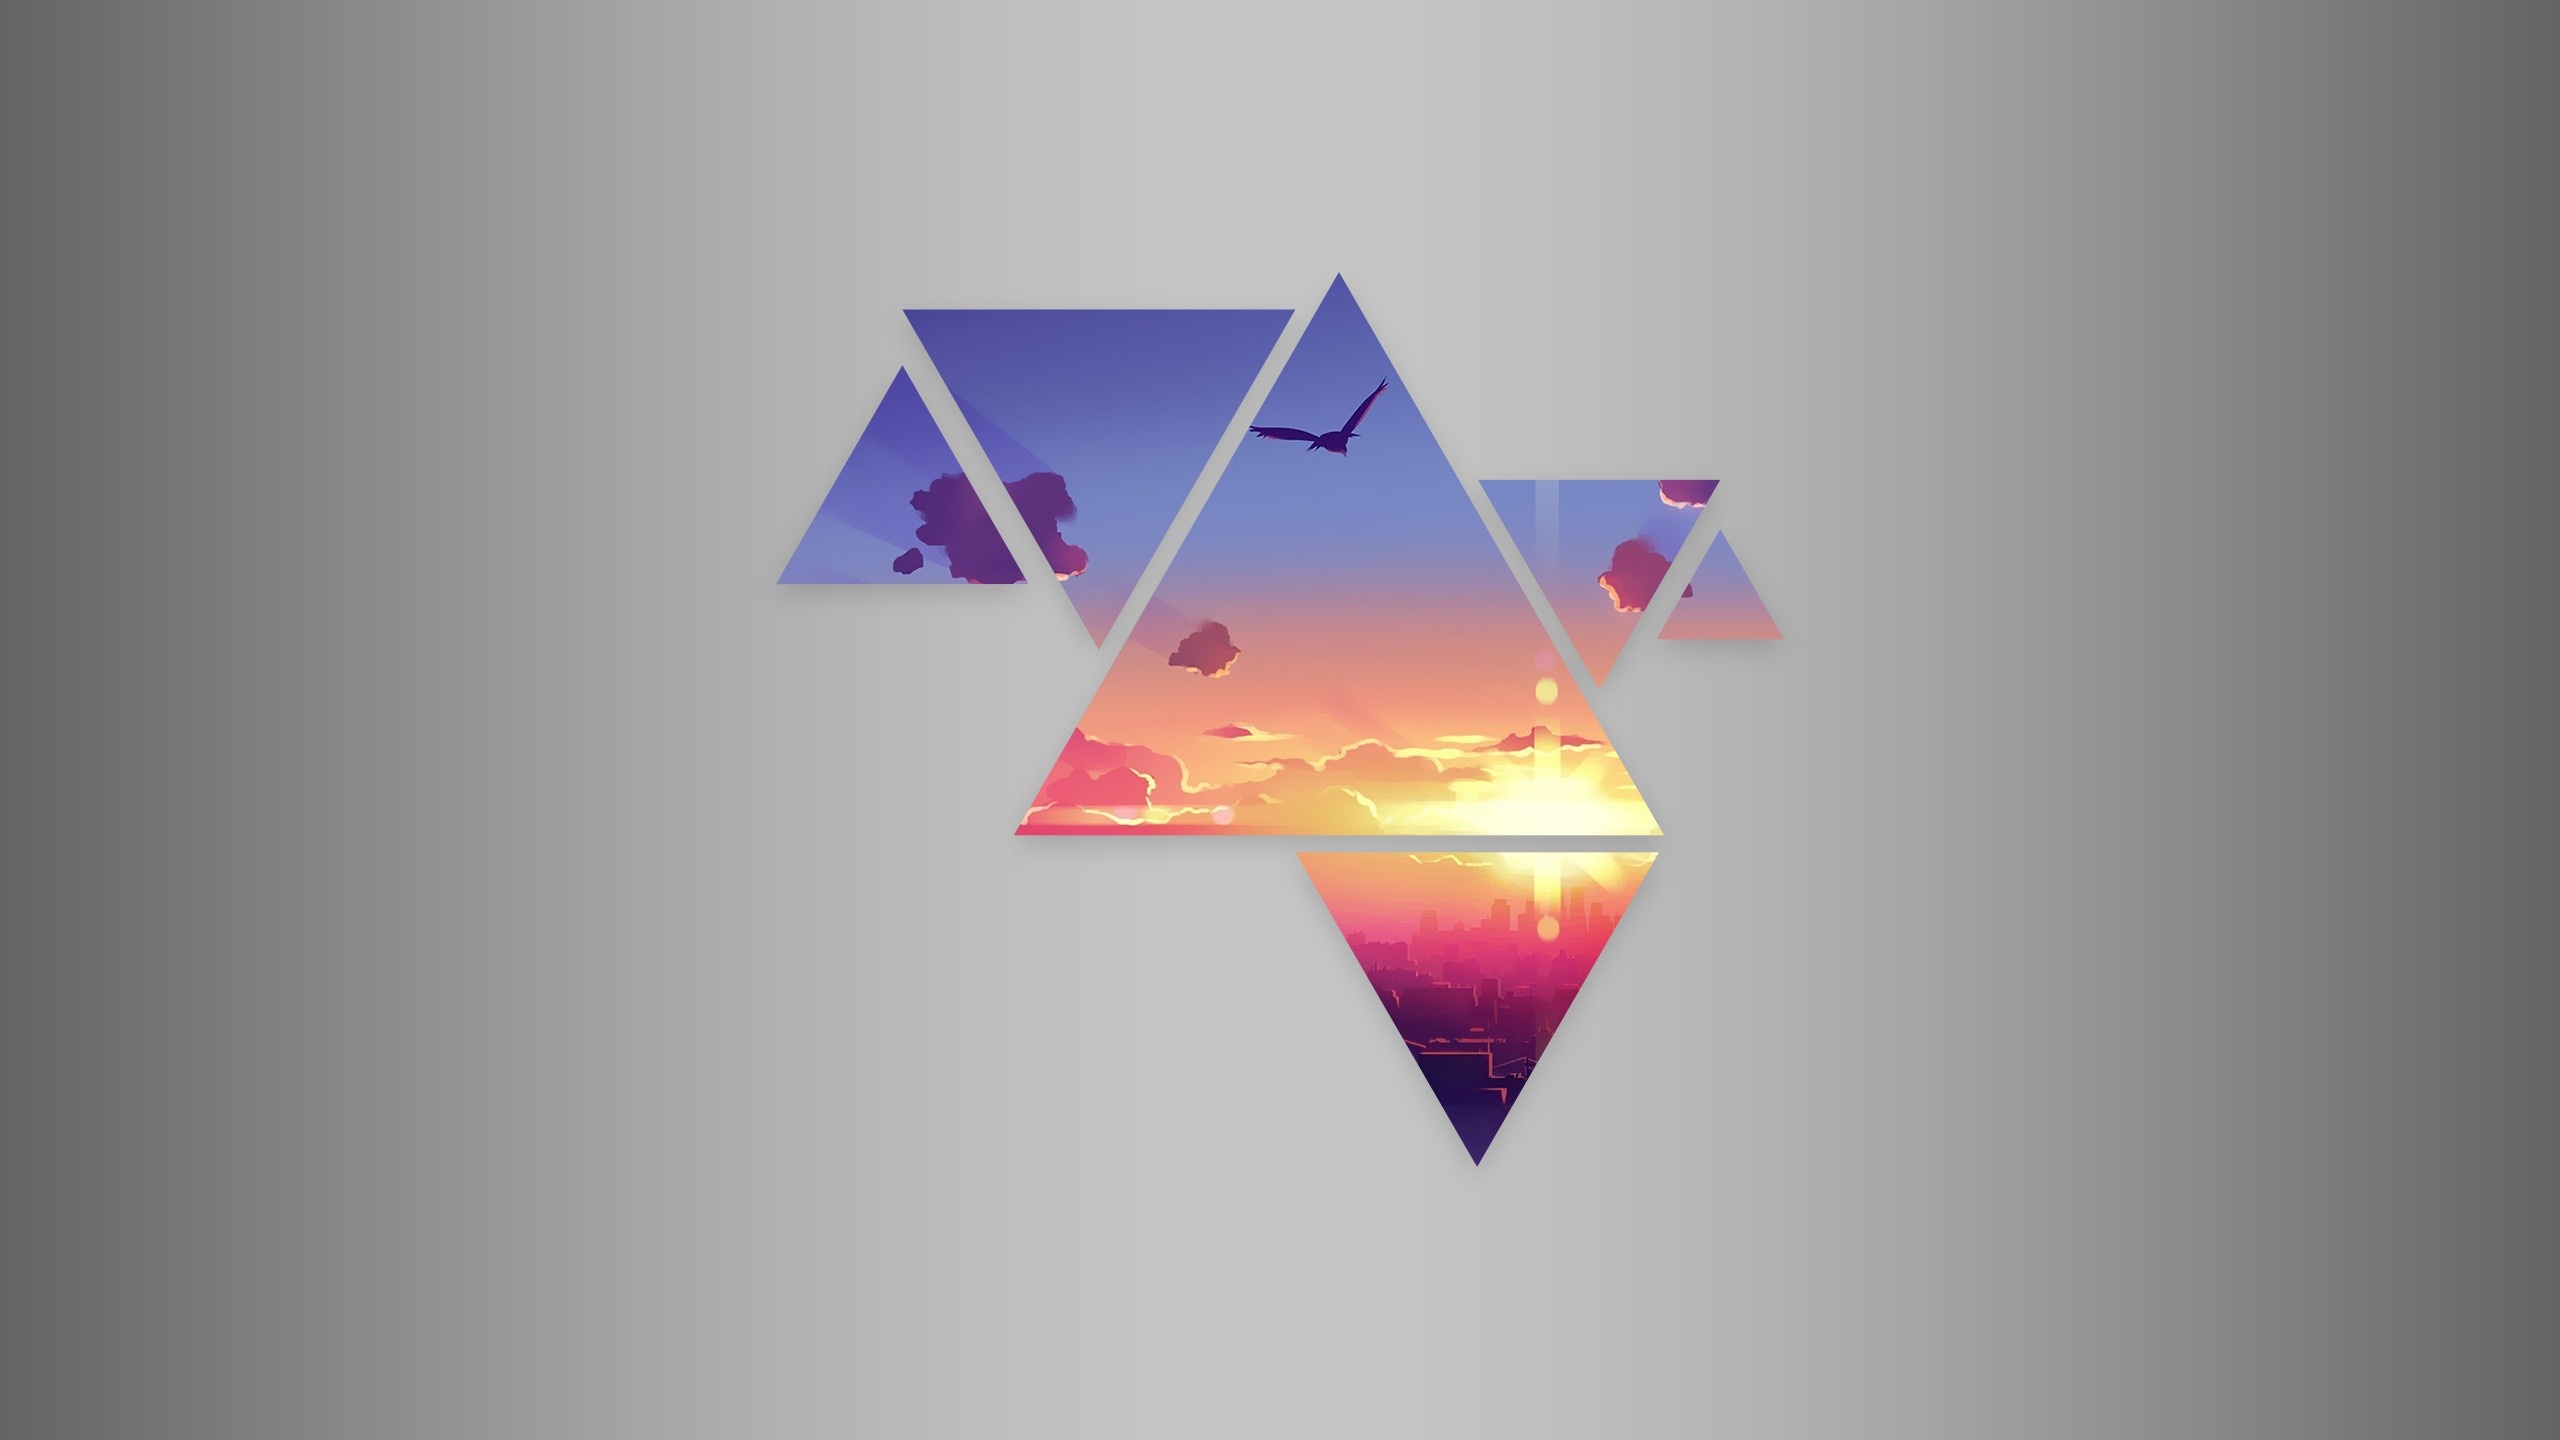 Graphic: Illustration, Abstract design, Equilateral triangles, Polyscape. 2560x1440 HD Wallpaper.